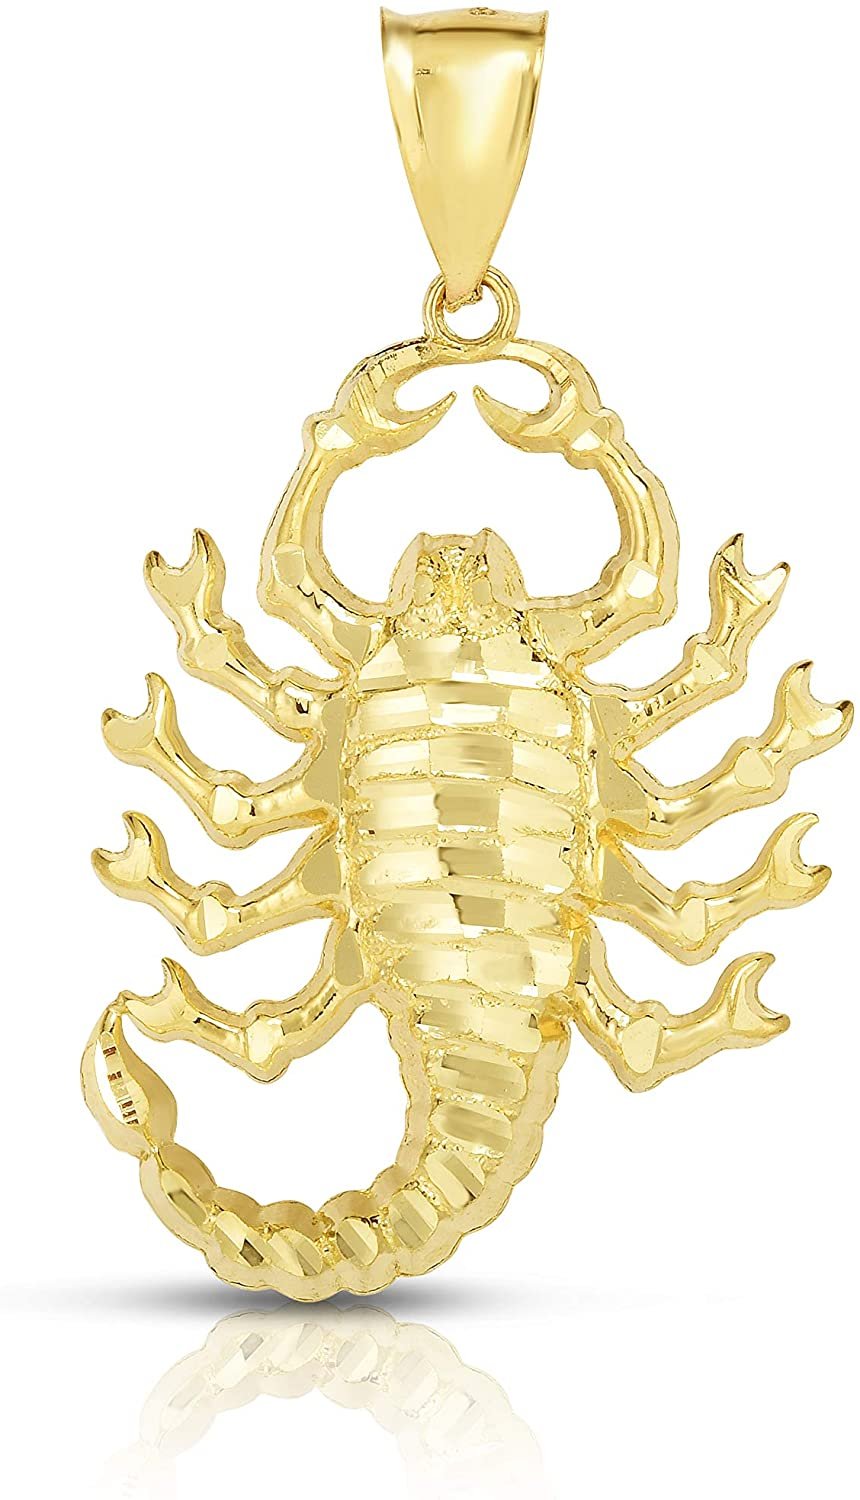 10k Yellow Gold Scorpion Pendant for Necklace